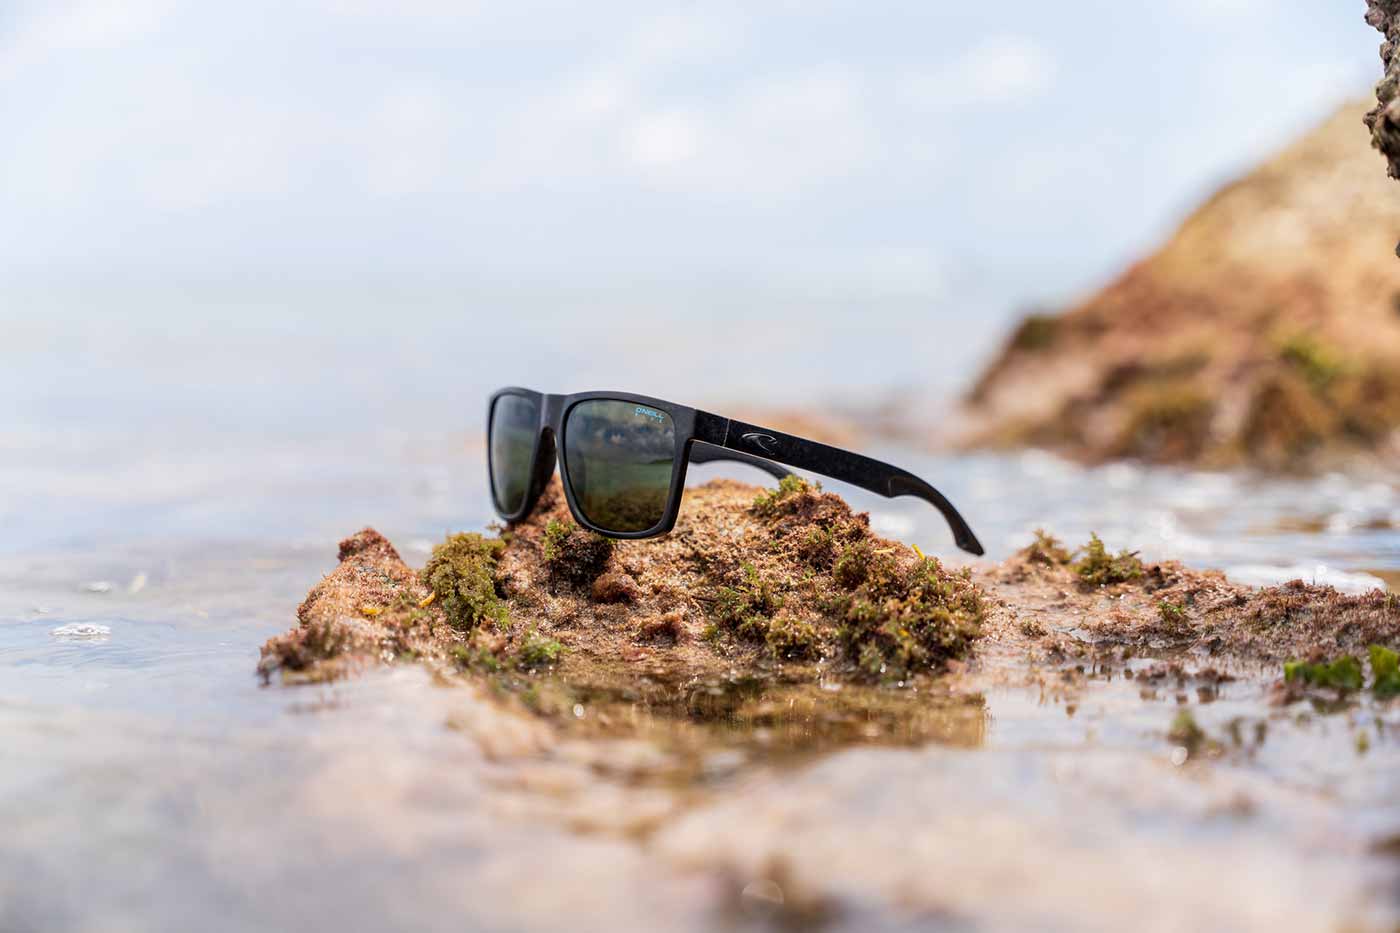 O'NEILL BLUELYN POLARIZED sunglasses are constructed from ghost fishing nets and recycled rubber. Repurposed waste is combined with natural mineral glass lenses – every element thoughtfully aligned with O’Neill BLUE’s mission to protect our oceans.